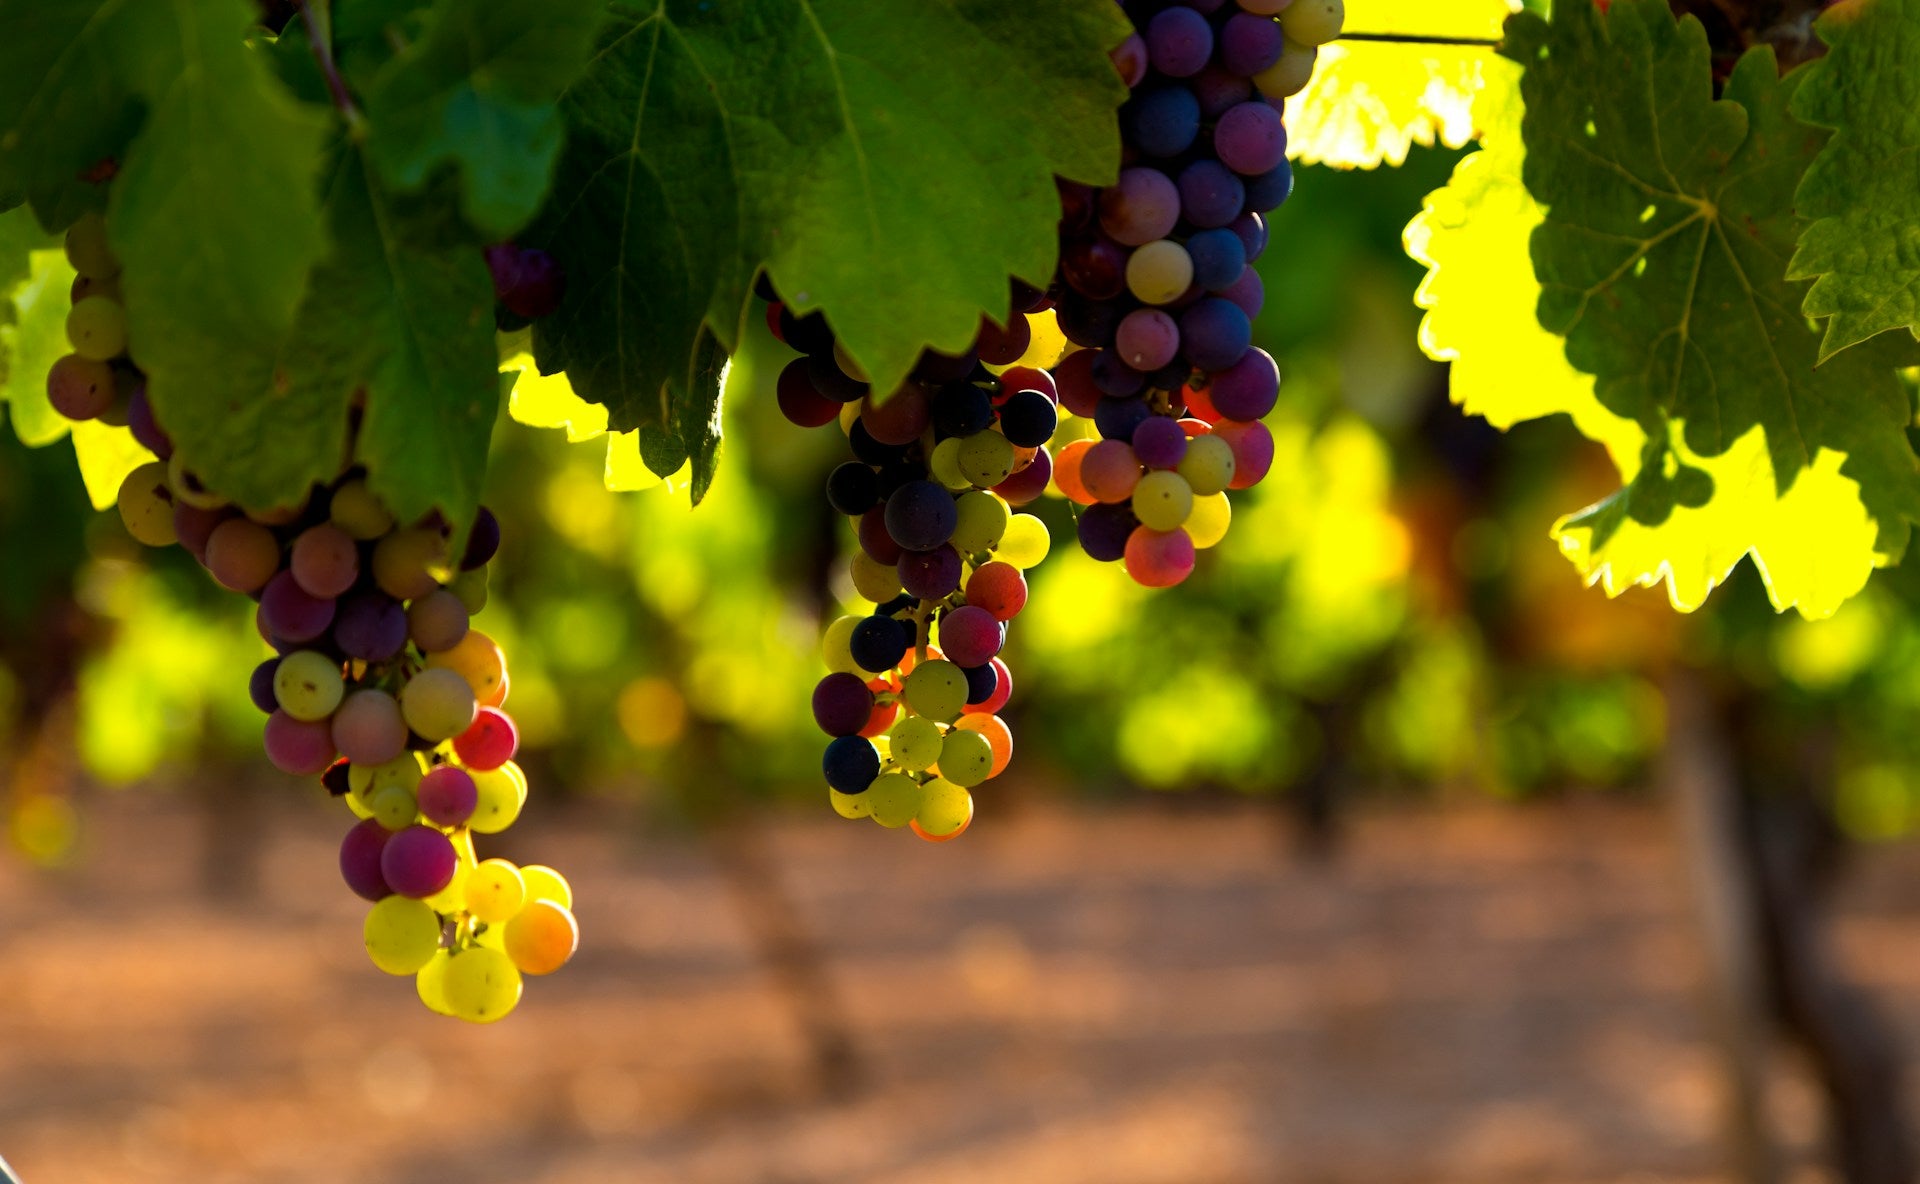 Multicolored grapes hanging from the vine.